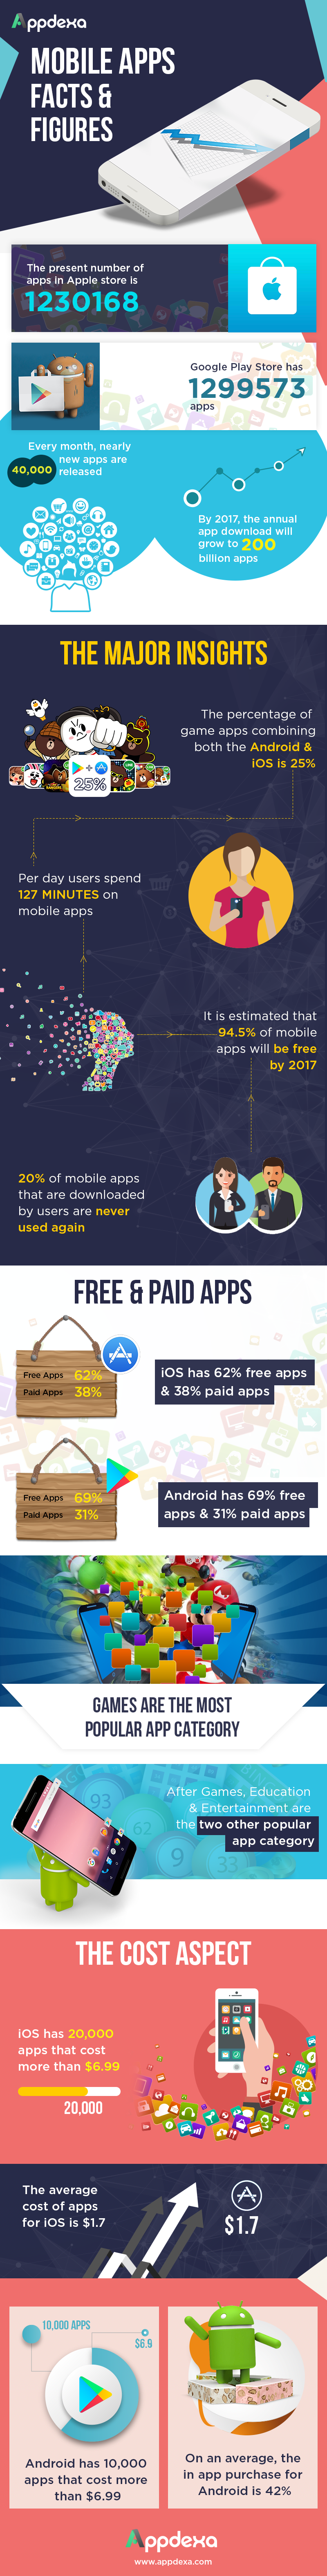 It’s an App-Happy World: Facts and Figures About the Mobile Apps Revolution - Infographic